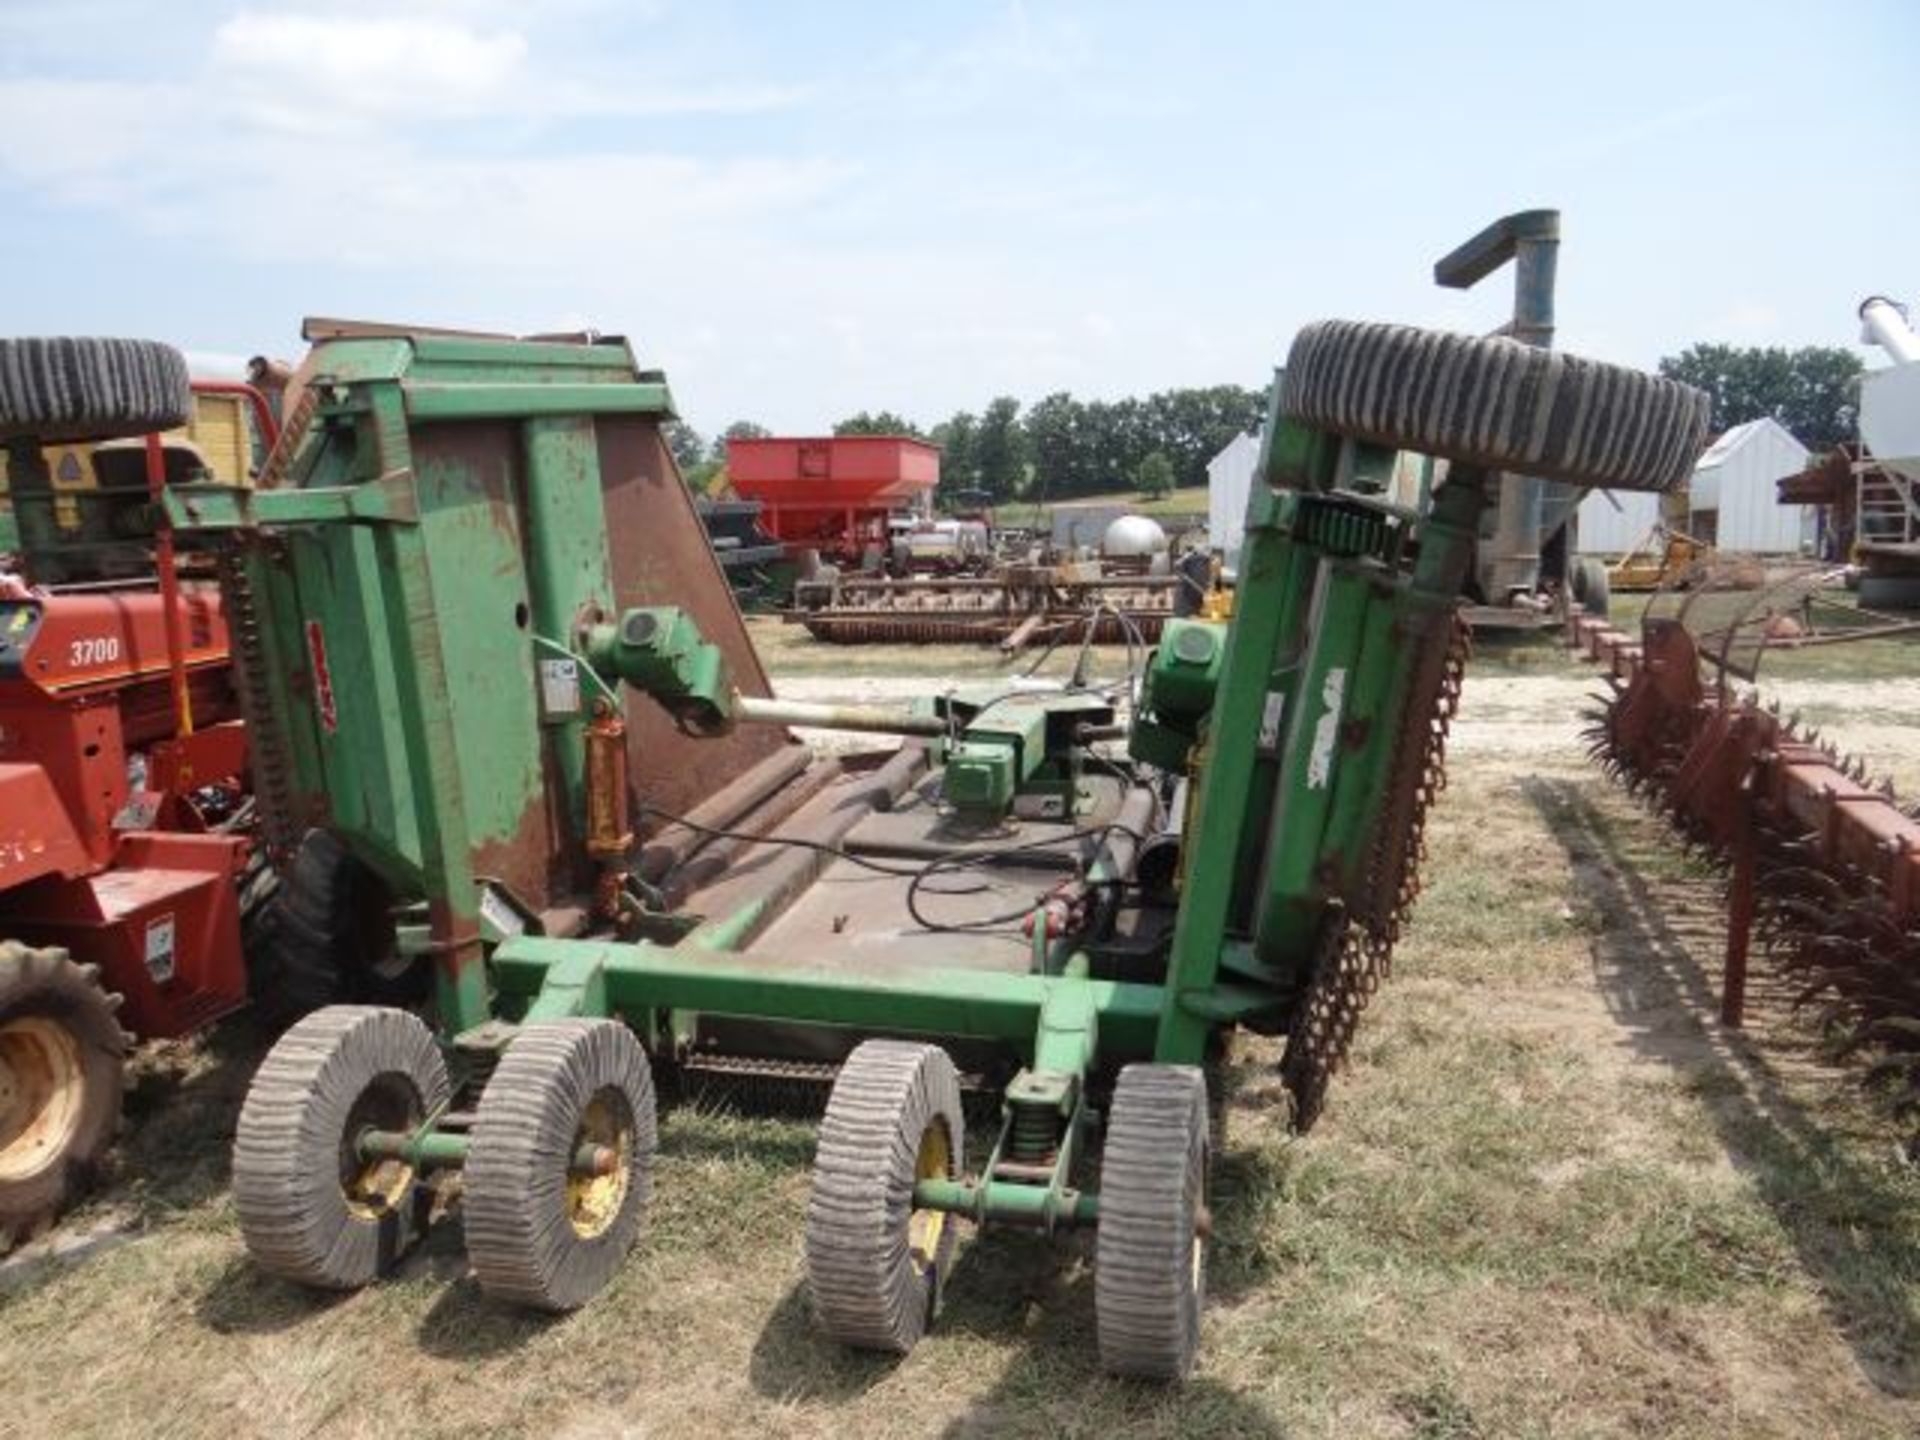 JD 1518 Cutter, 1993 #60393, 6 Laminated Tires, 1000 PTO, Front and Rear Chains, Near New Blades - Image 3 of 3